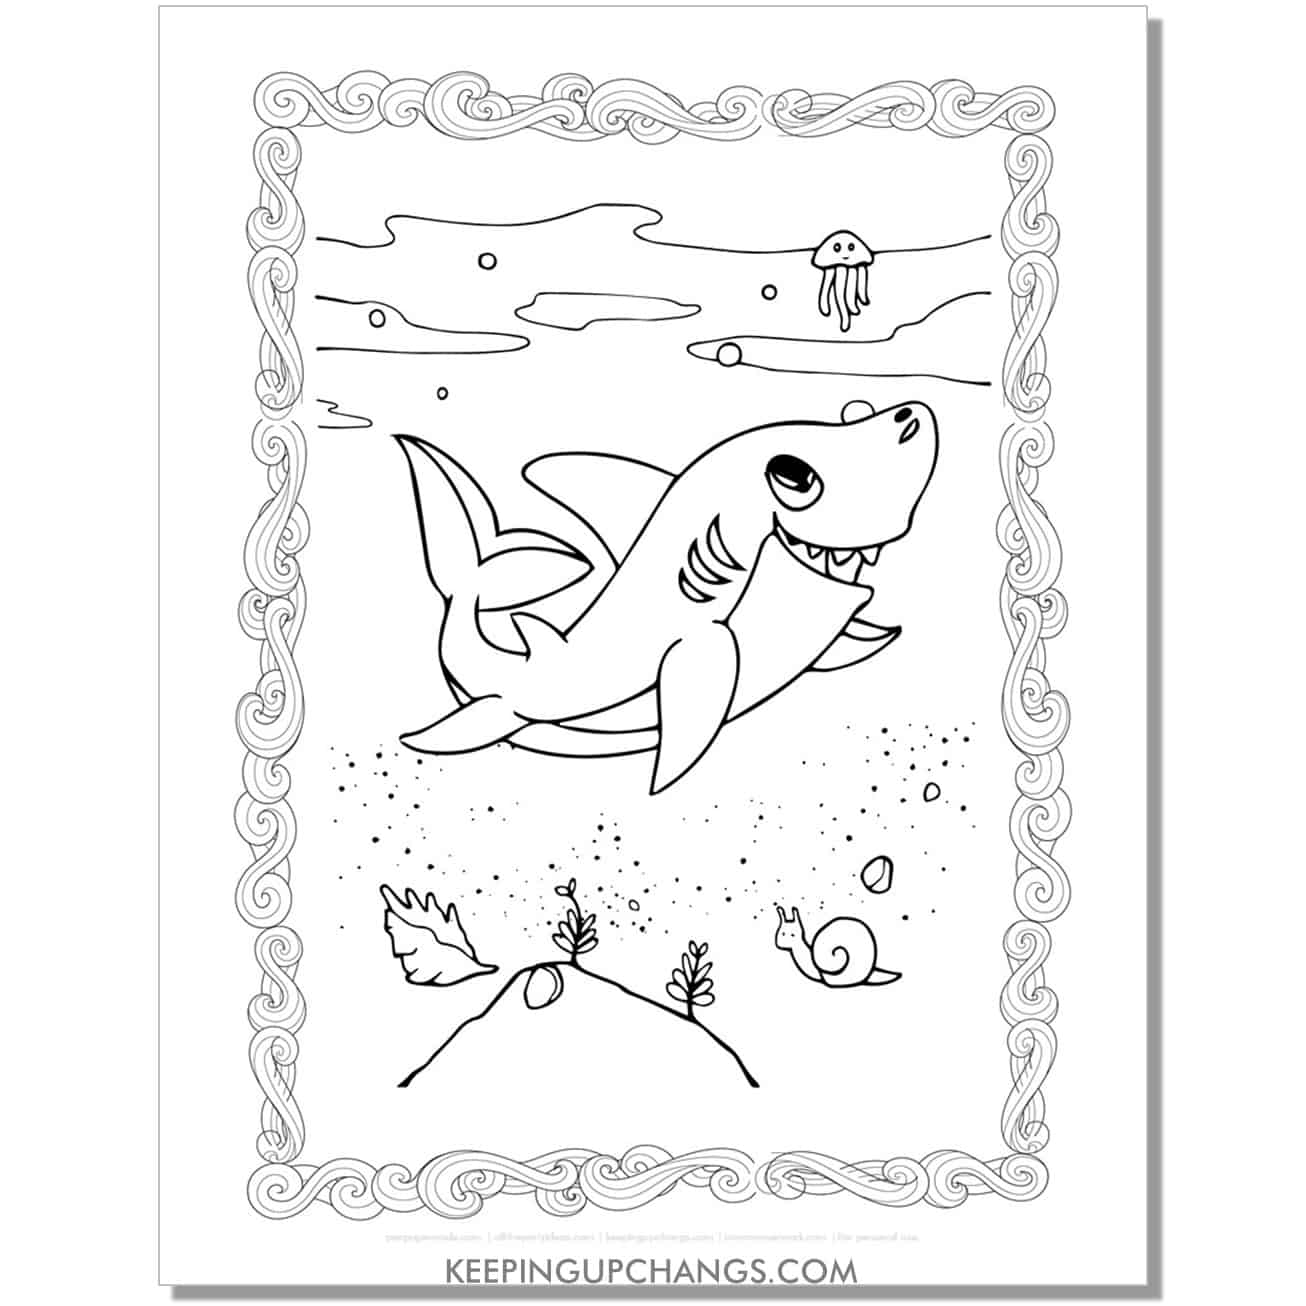 free shark with snail, jellyfish coloring page, sheet.